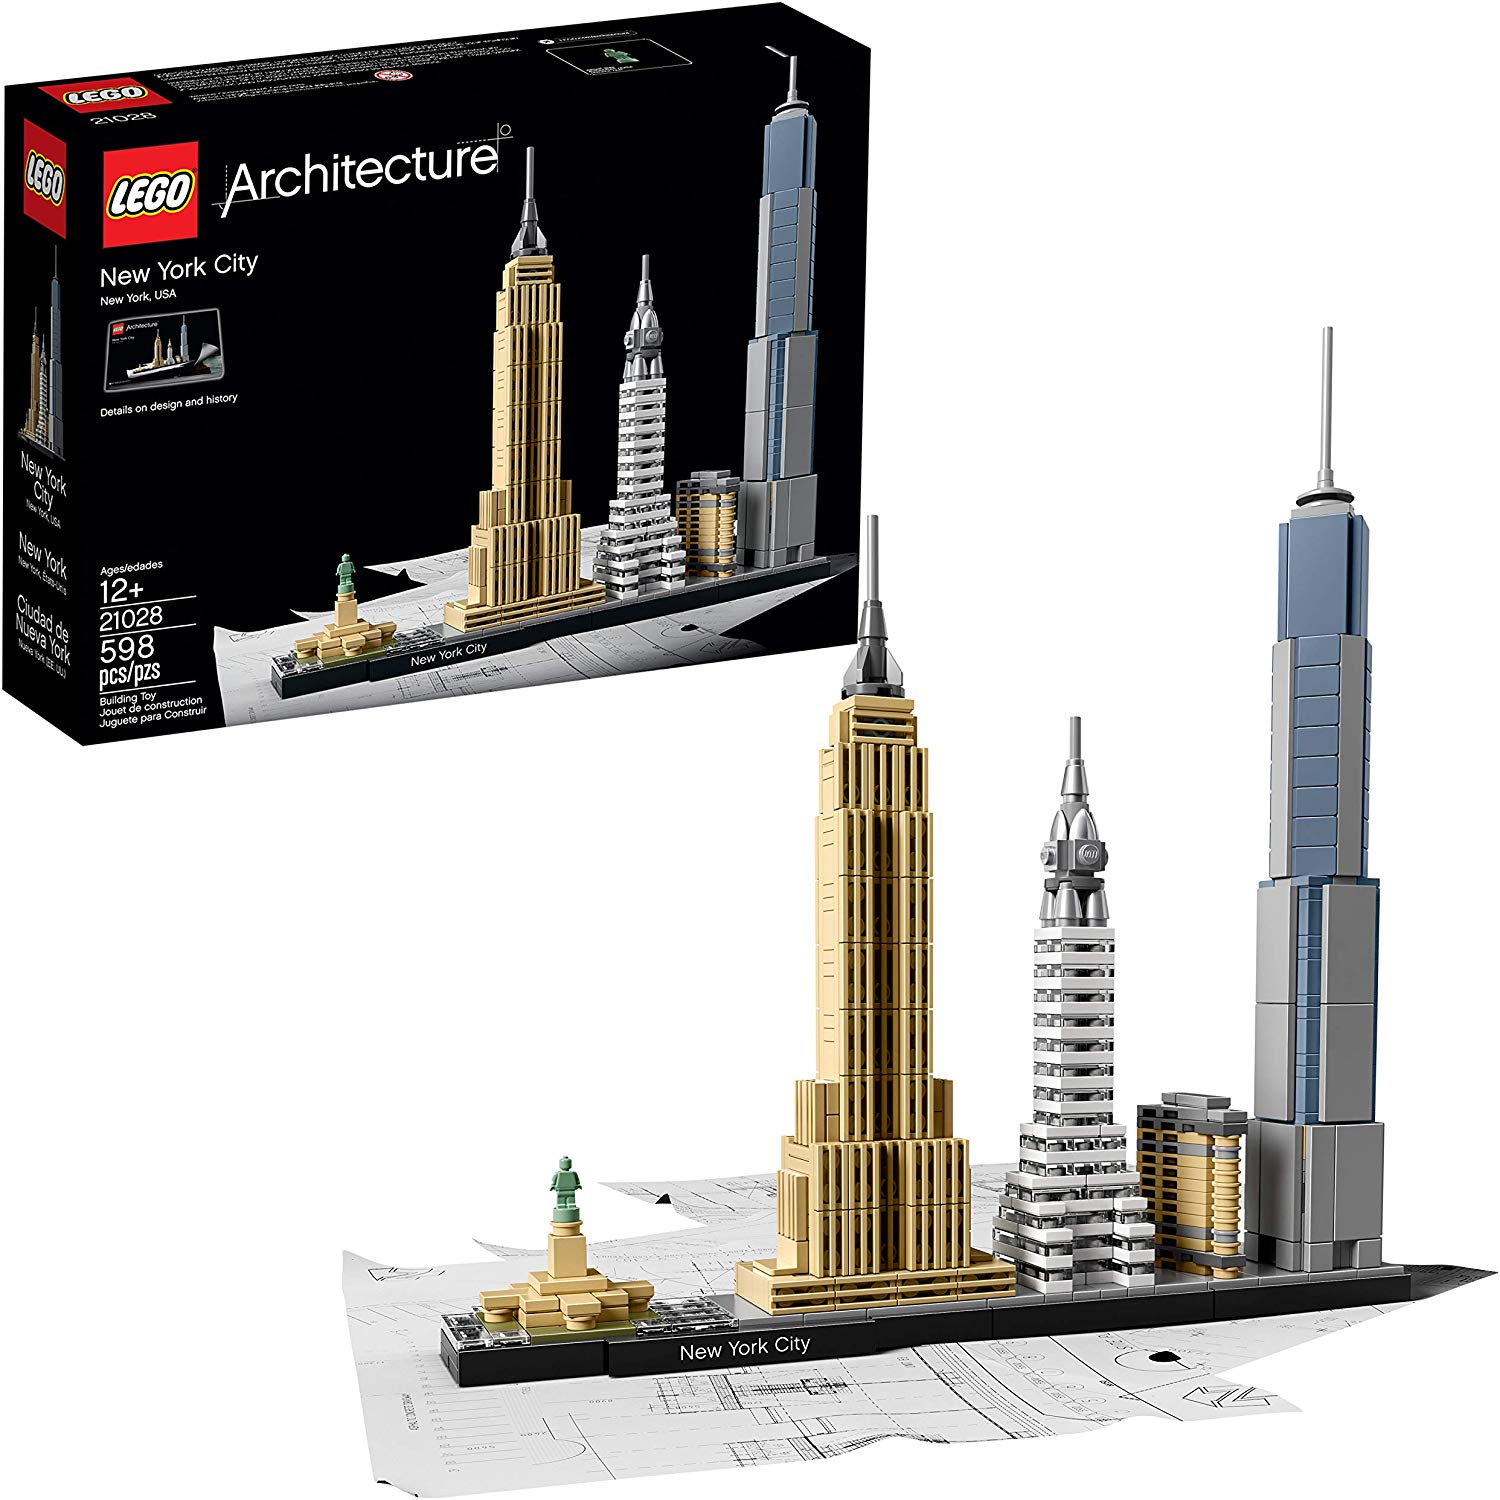 Lego Architecture New York City 21028 By Lego